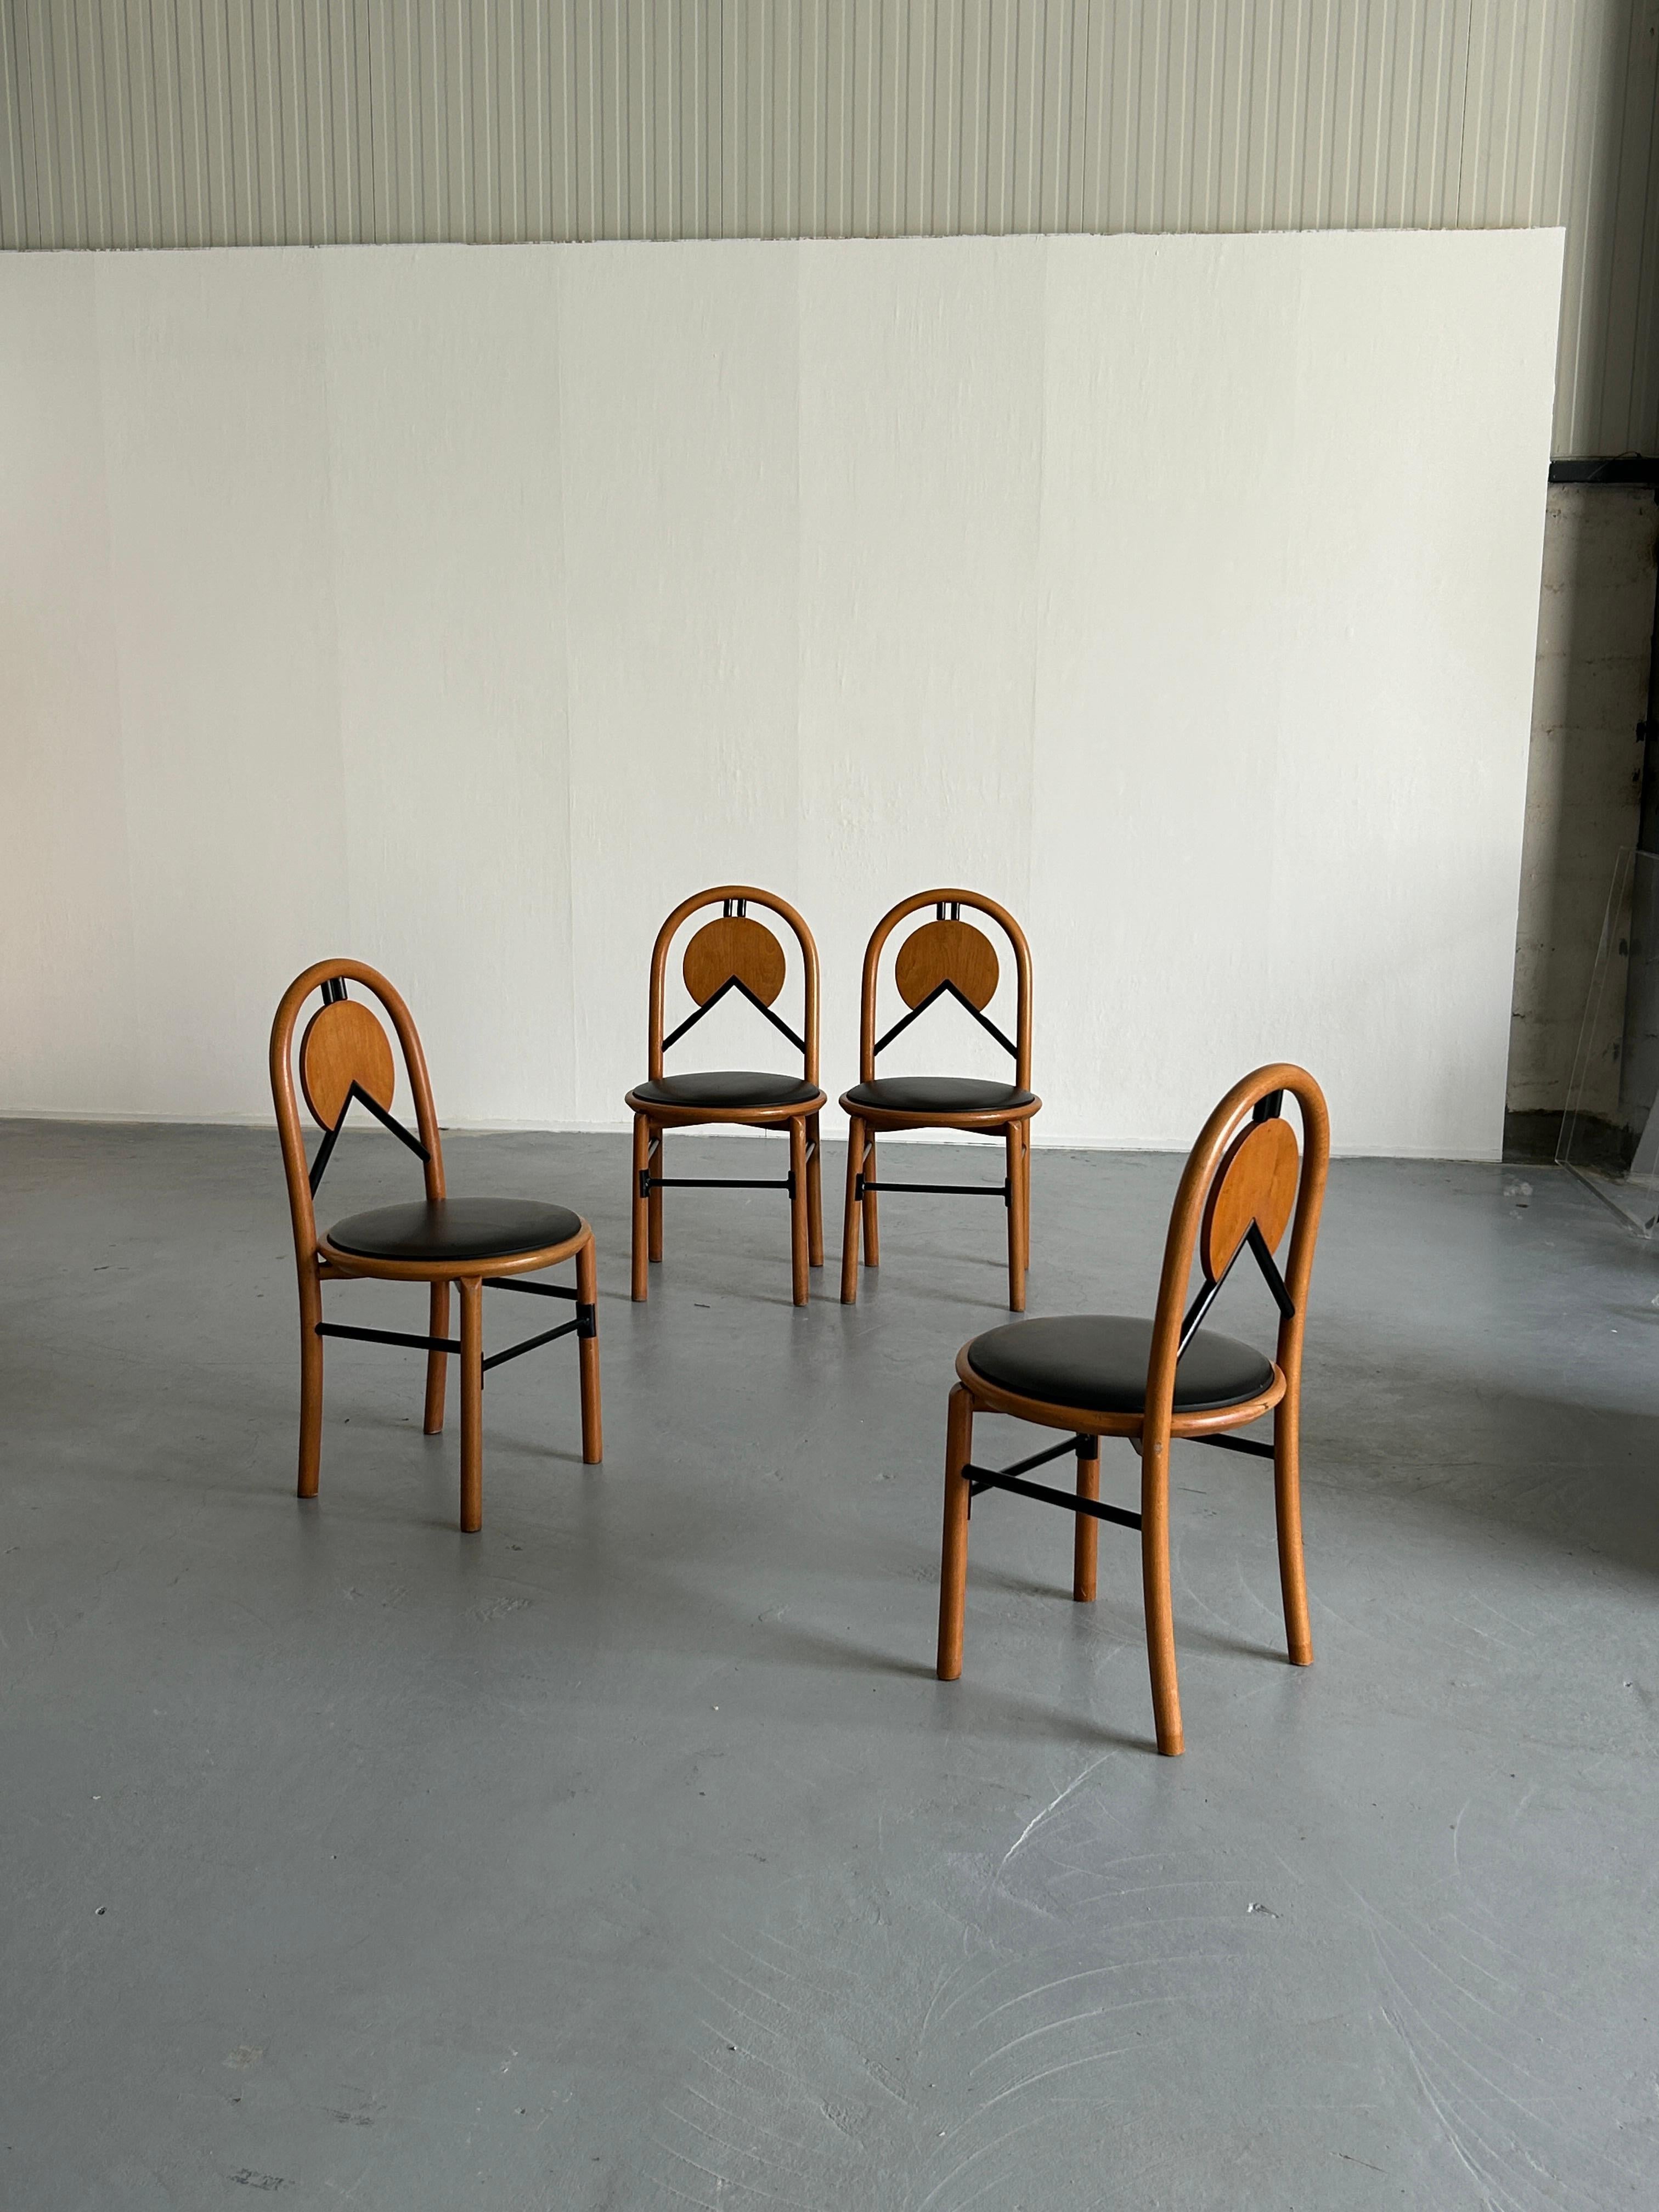 Late 20th Century Set of 4 Vintage Italian Postmodern Sculptural Chairs in the Style of Memphis